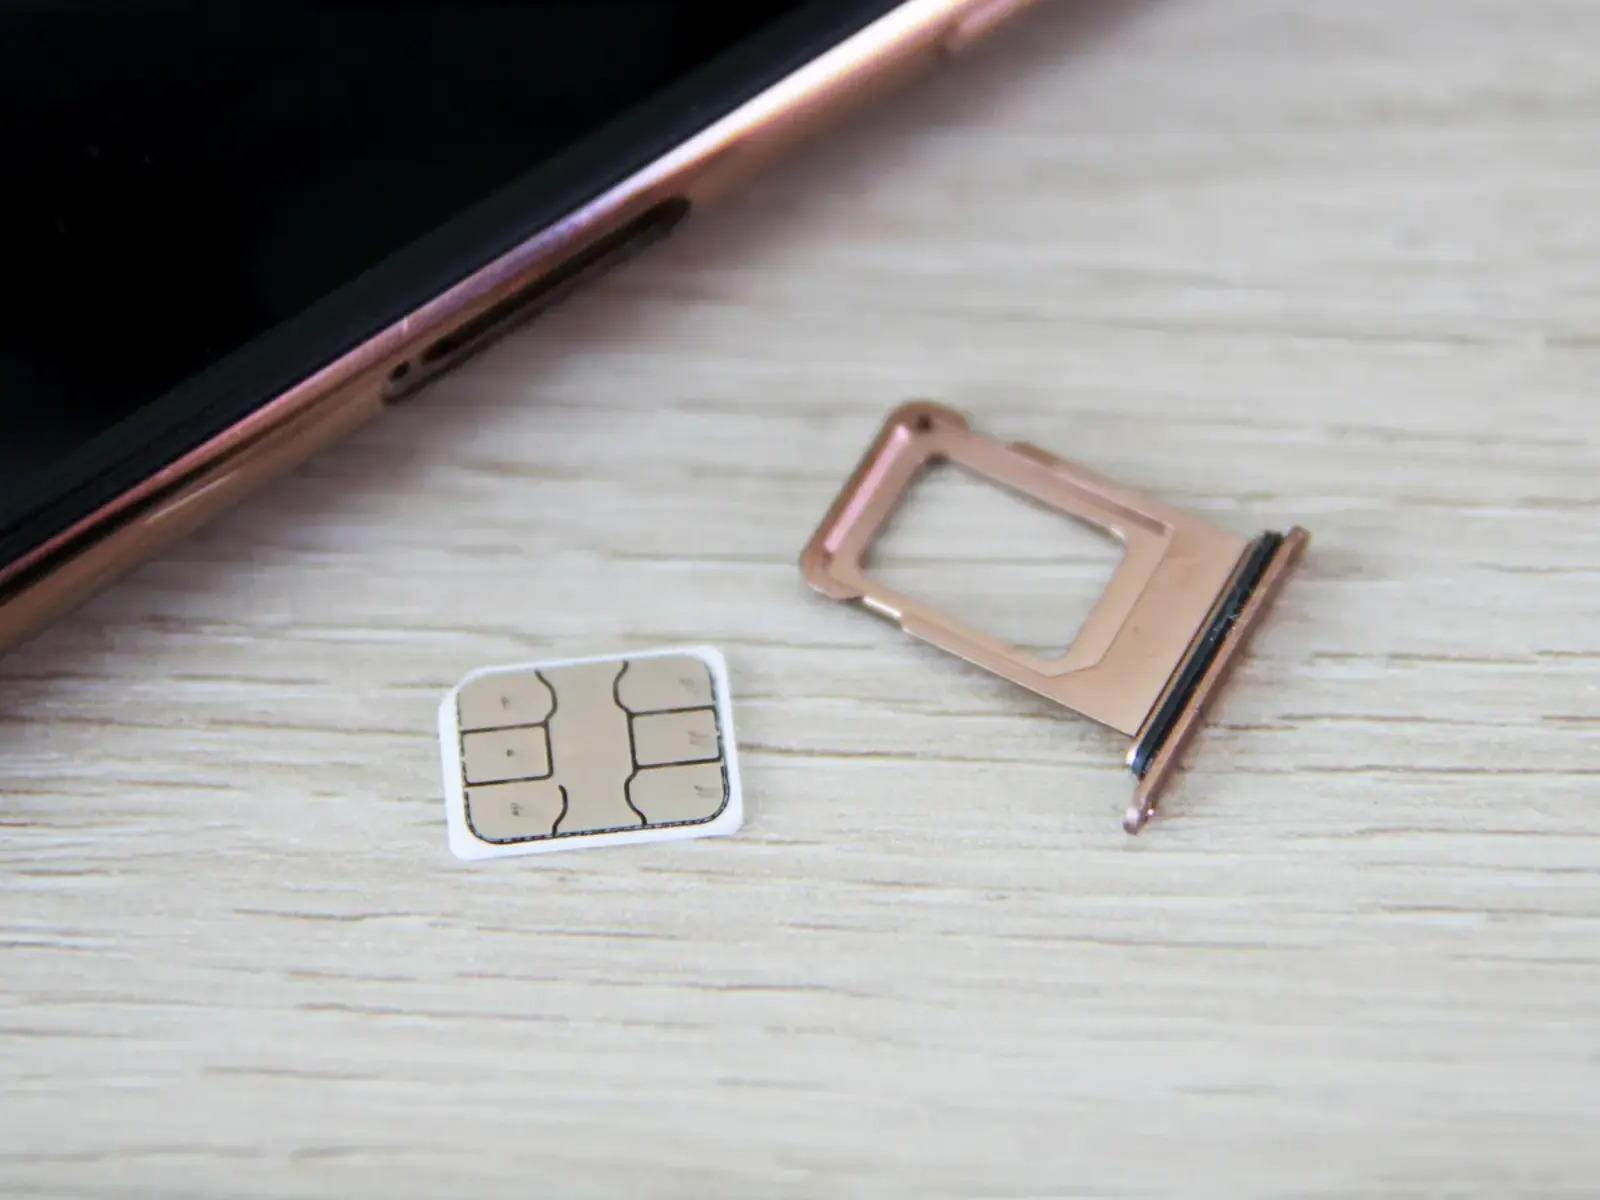 functions-of-a-nano-sim-card-explained